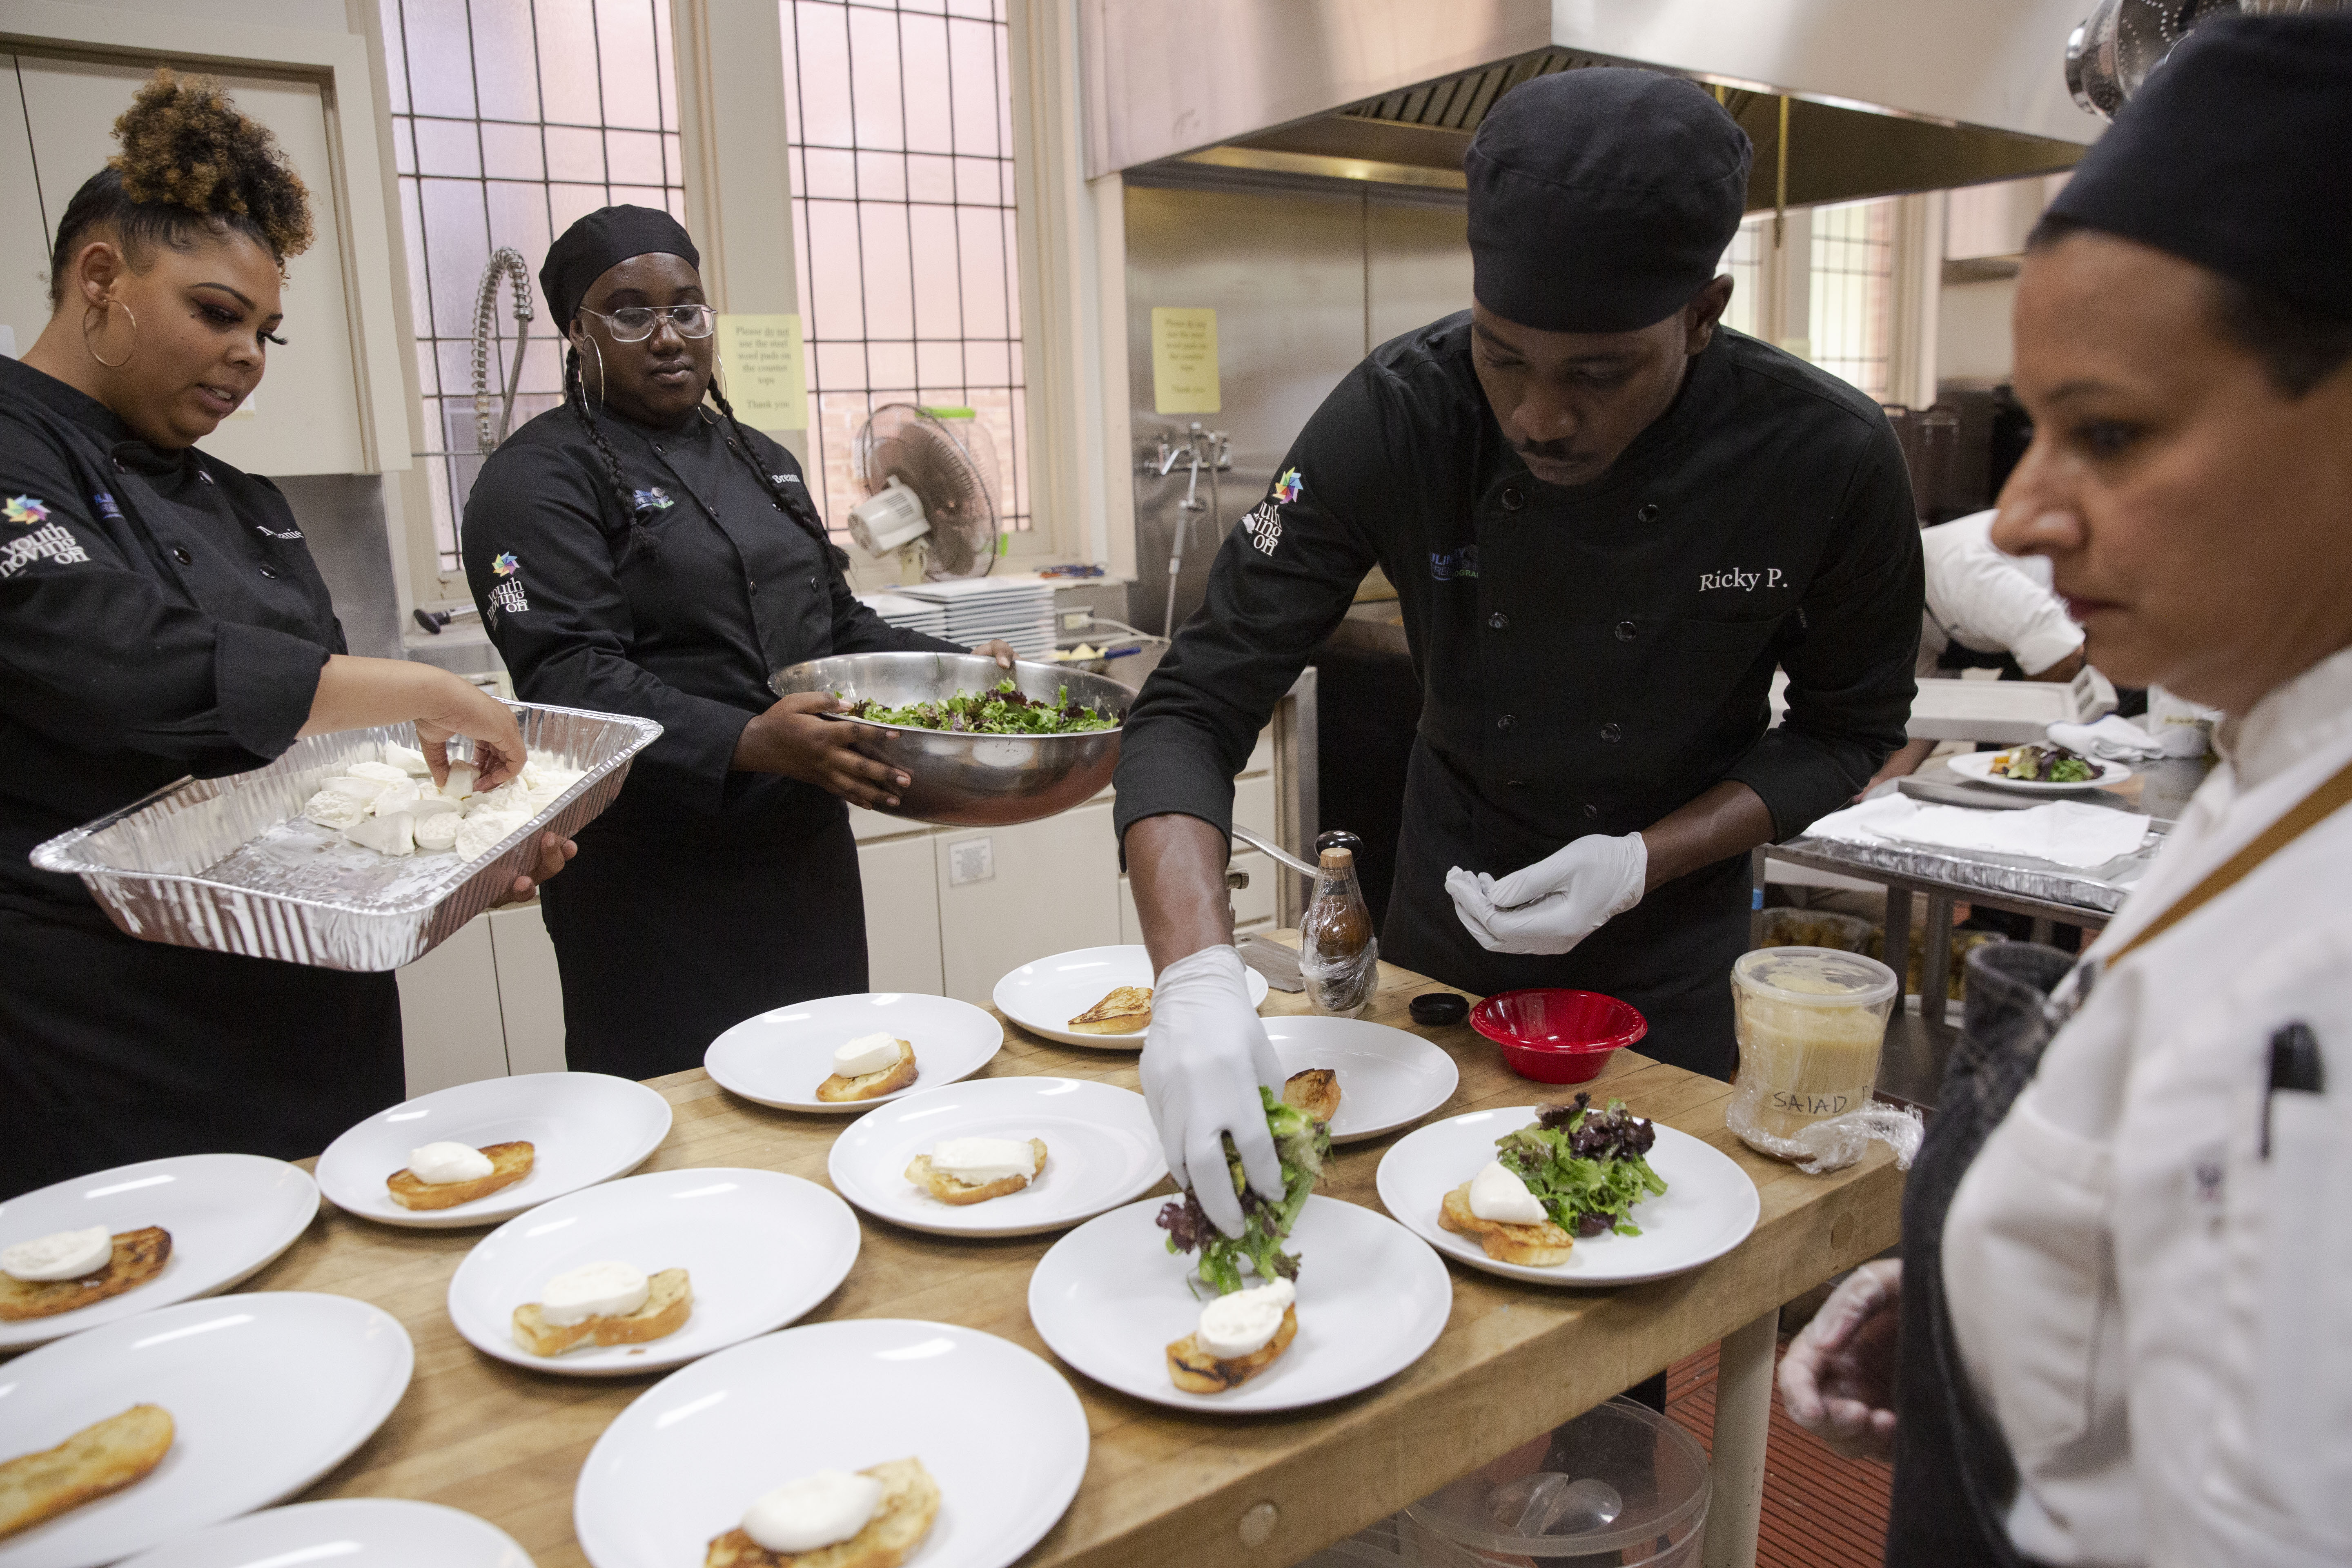 A dinner to remember, made by culinary students who are aging out of foster care